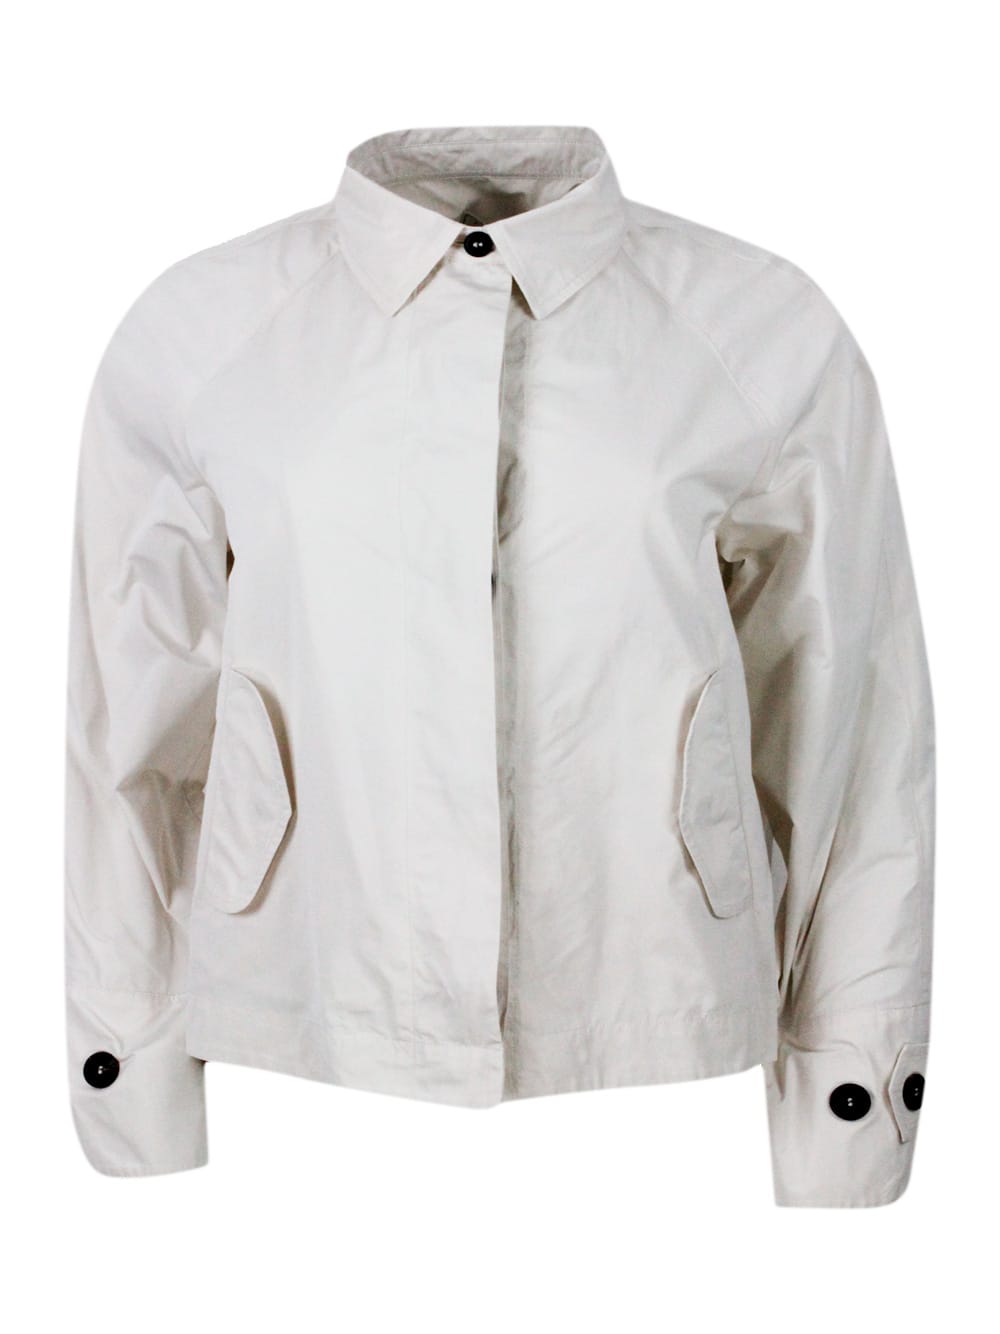 Lightweight Windproof Jacket With Shirt Collar, Button Closure And Side Pockets